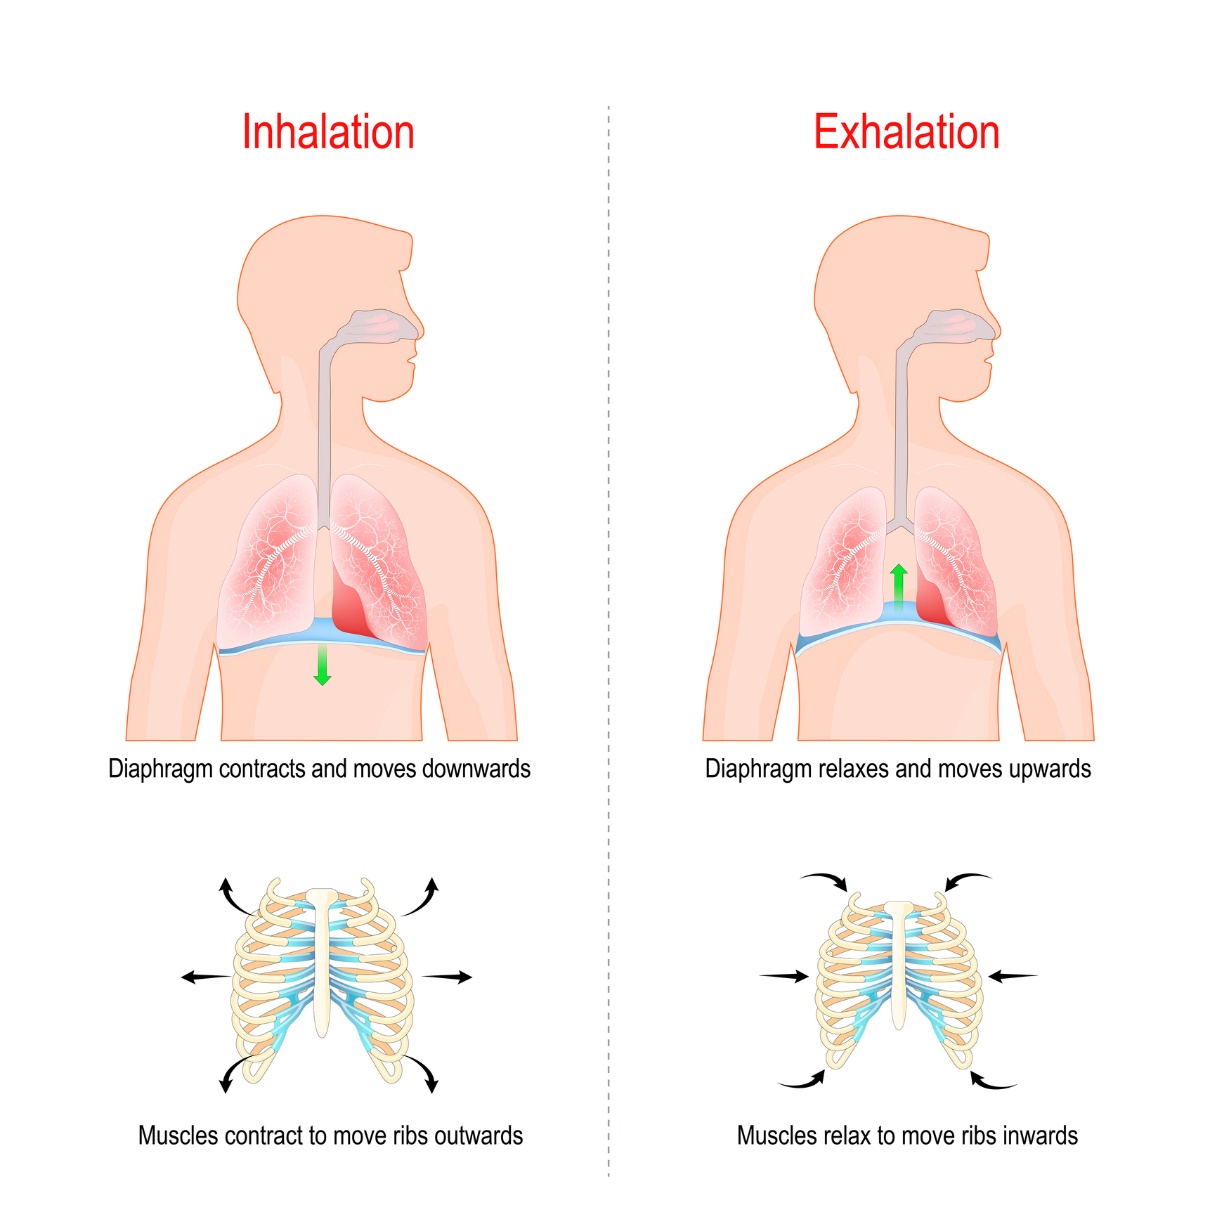 Diaphragmatic breathing with abdominal wall activation. Inhalation: ribs move sideways away from each other and the diaphragm muscle drops down. Exhalation: ribs move back towards each other and the diaphragm muscle rises up